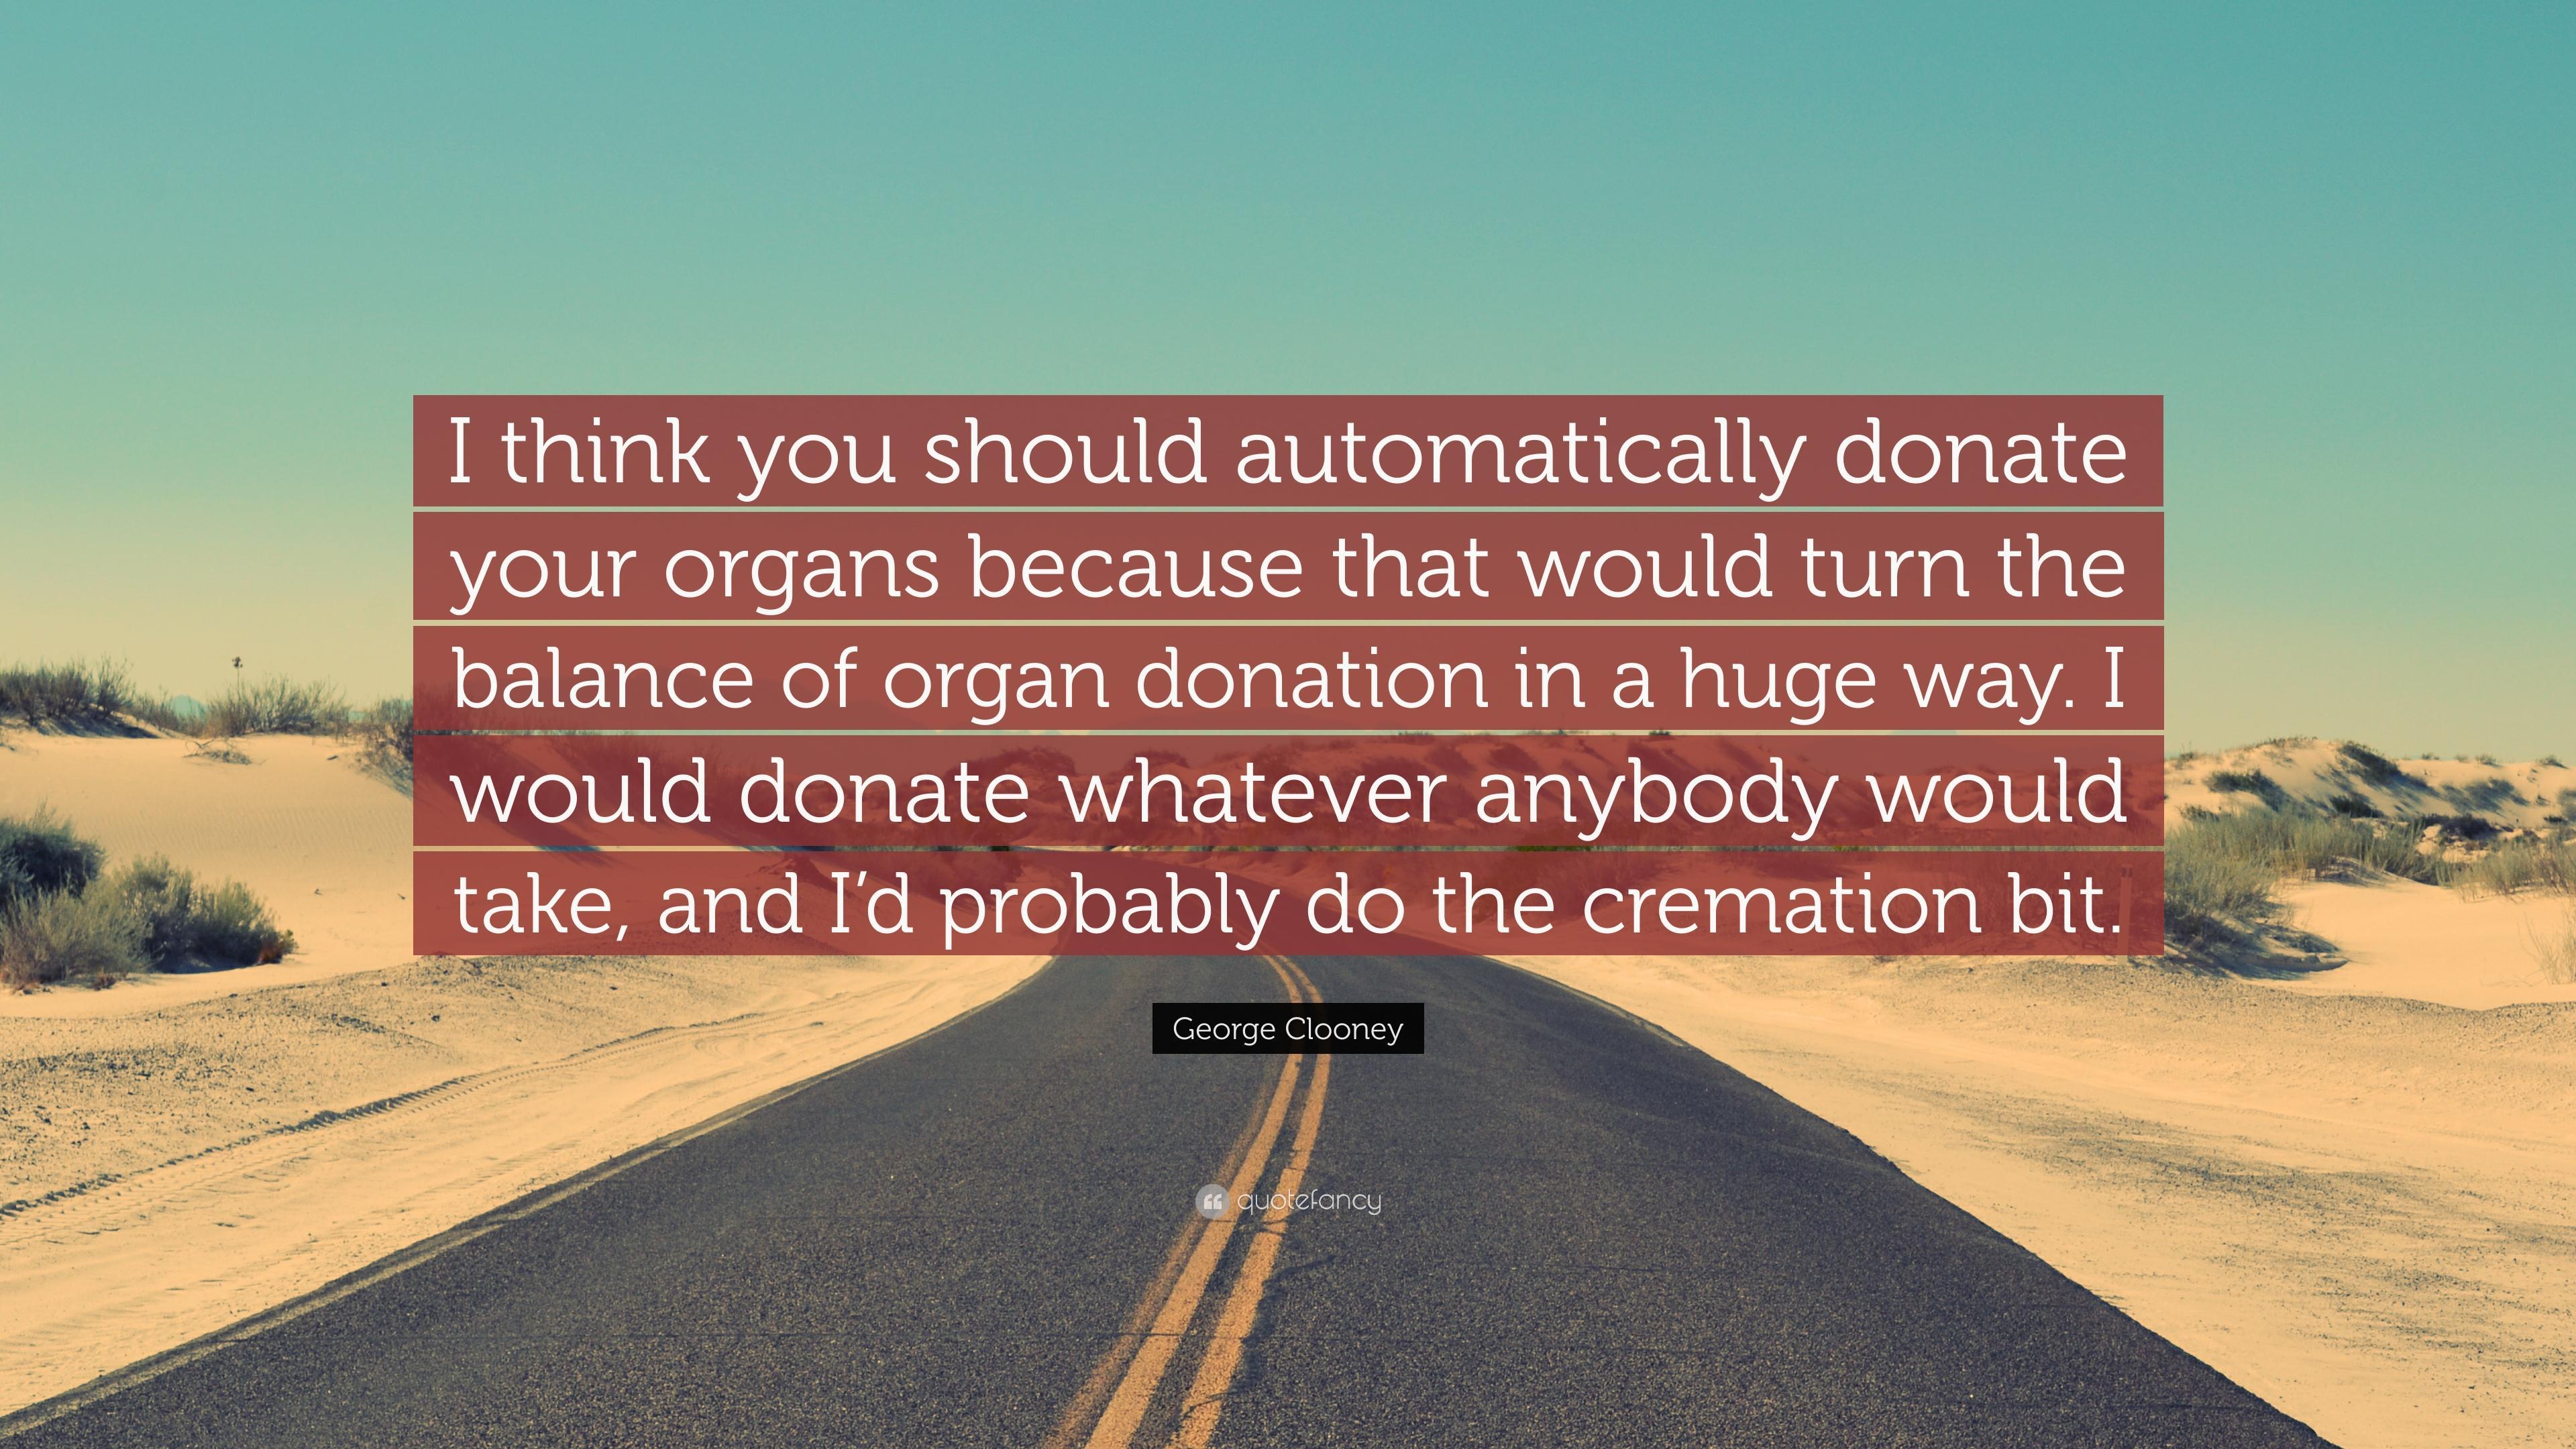 George Clooney Quote: “I think you should automatically donate